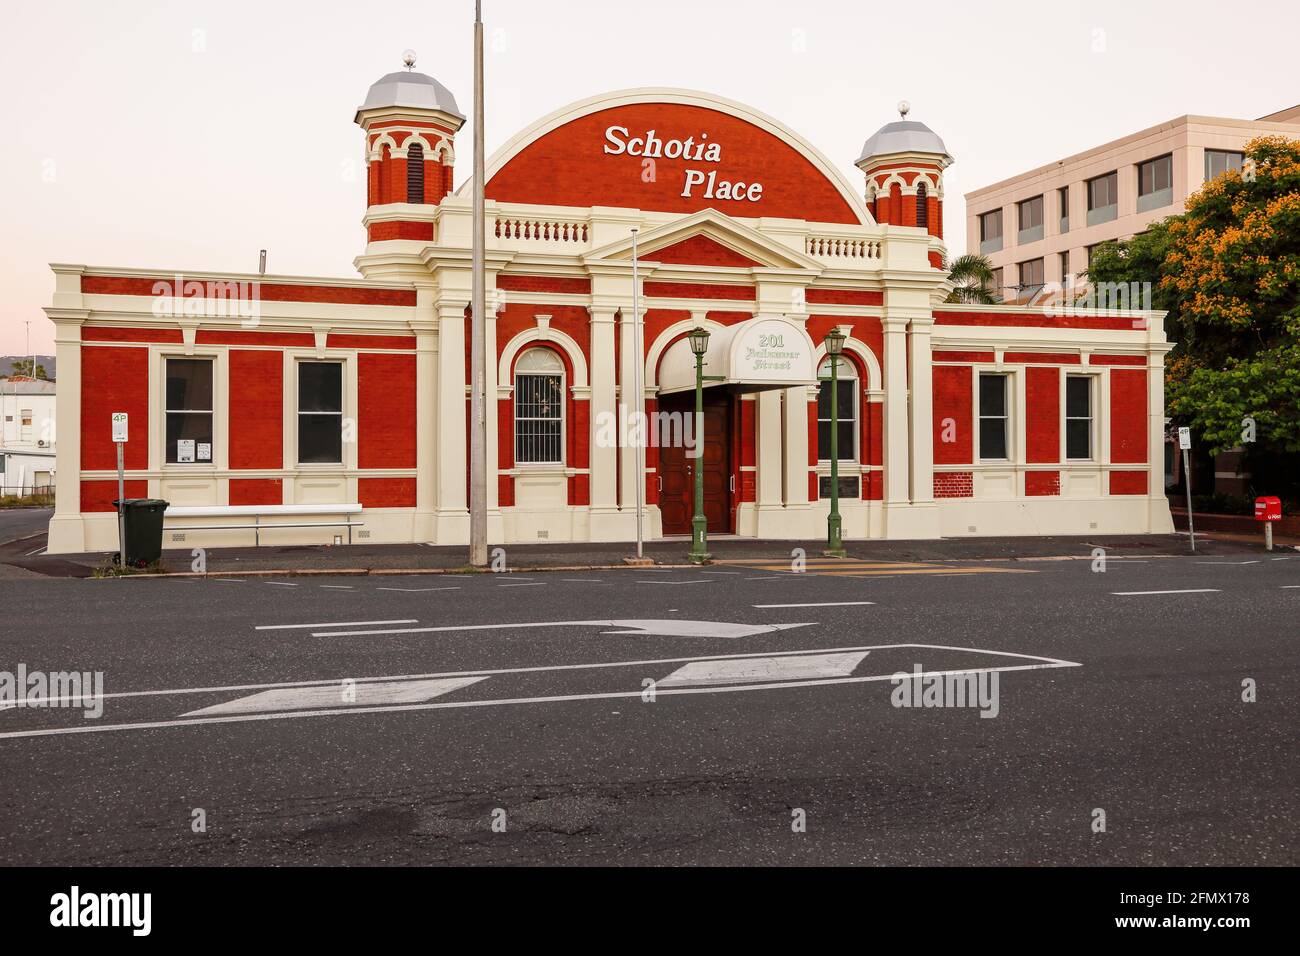 Rockhampton, Qld, Australia - 24 December 2014. The Schotia Place building is a unique heritage-listed building built in 1898. Stock Photo